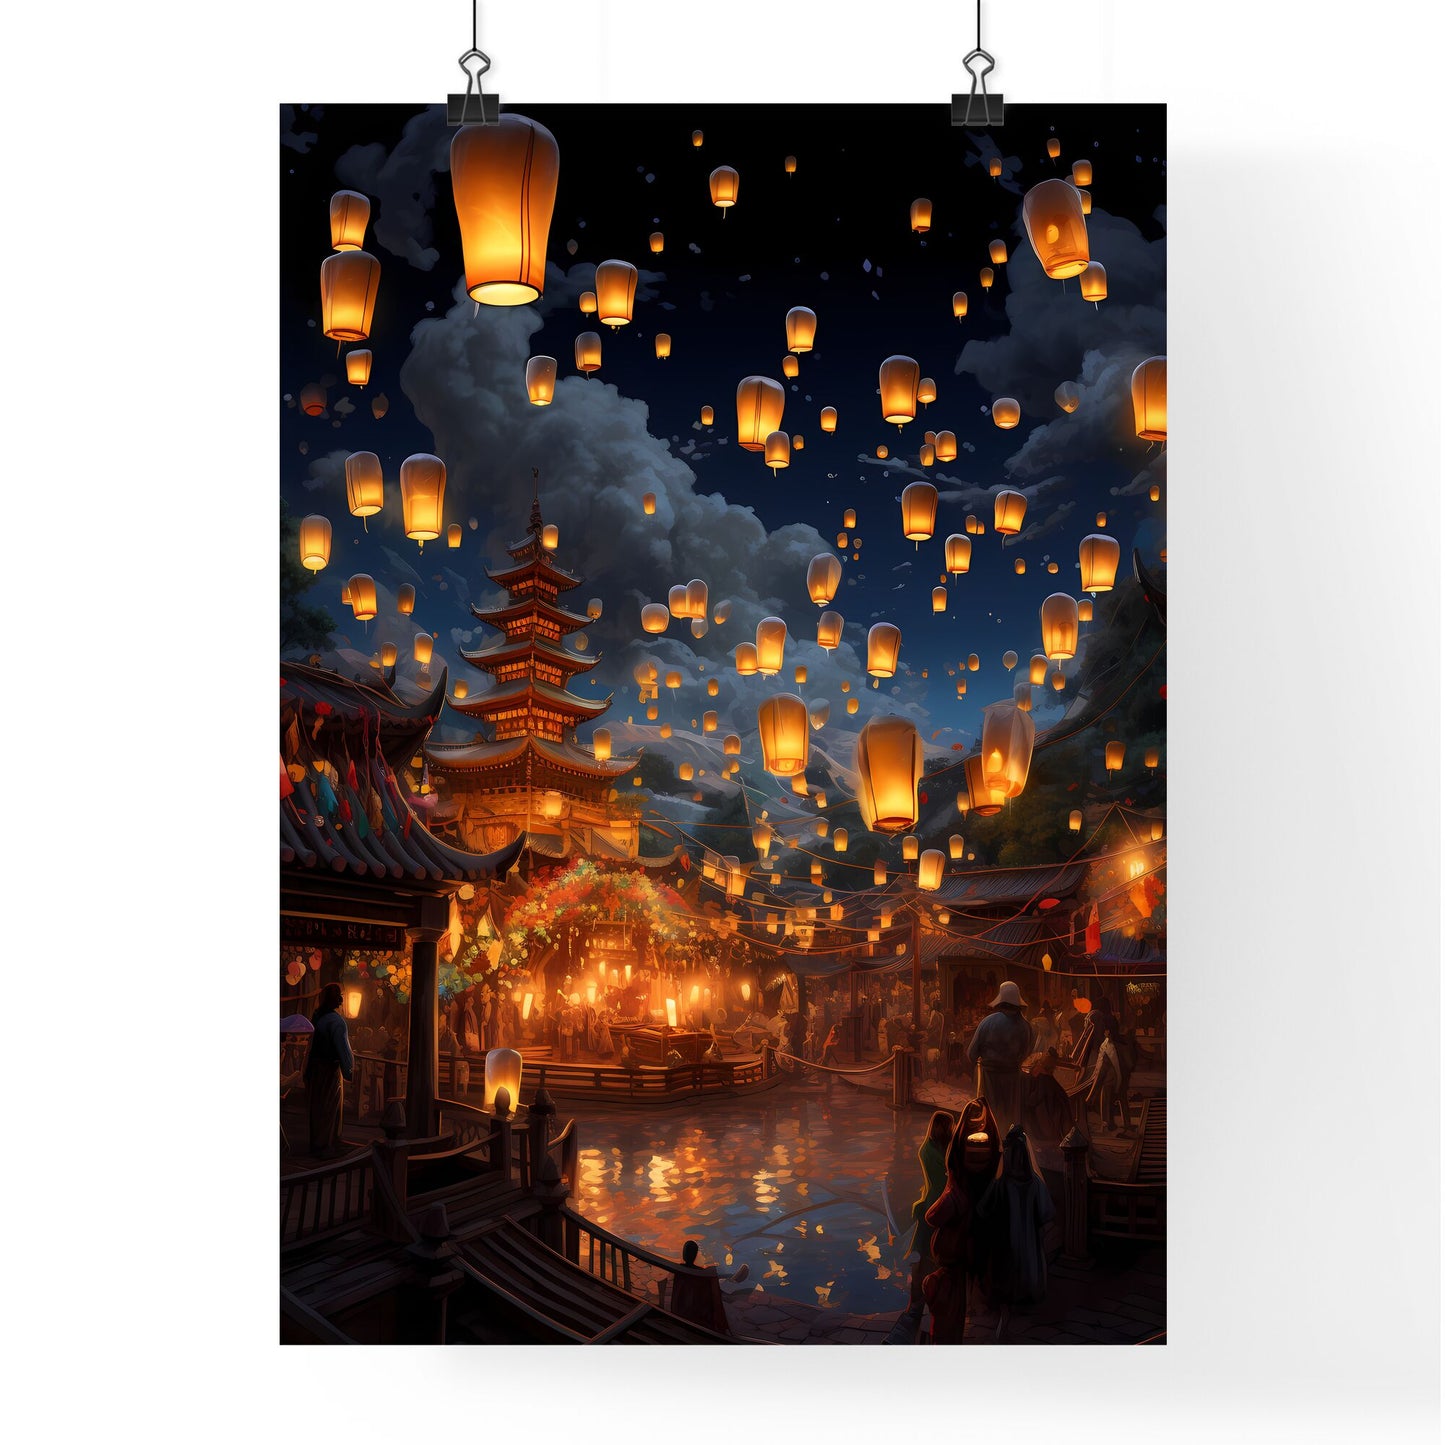 A Poster of Celebration scene with 100 lanterns - A Building With Lanterns In The Sky Default Title